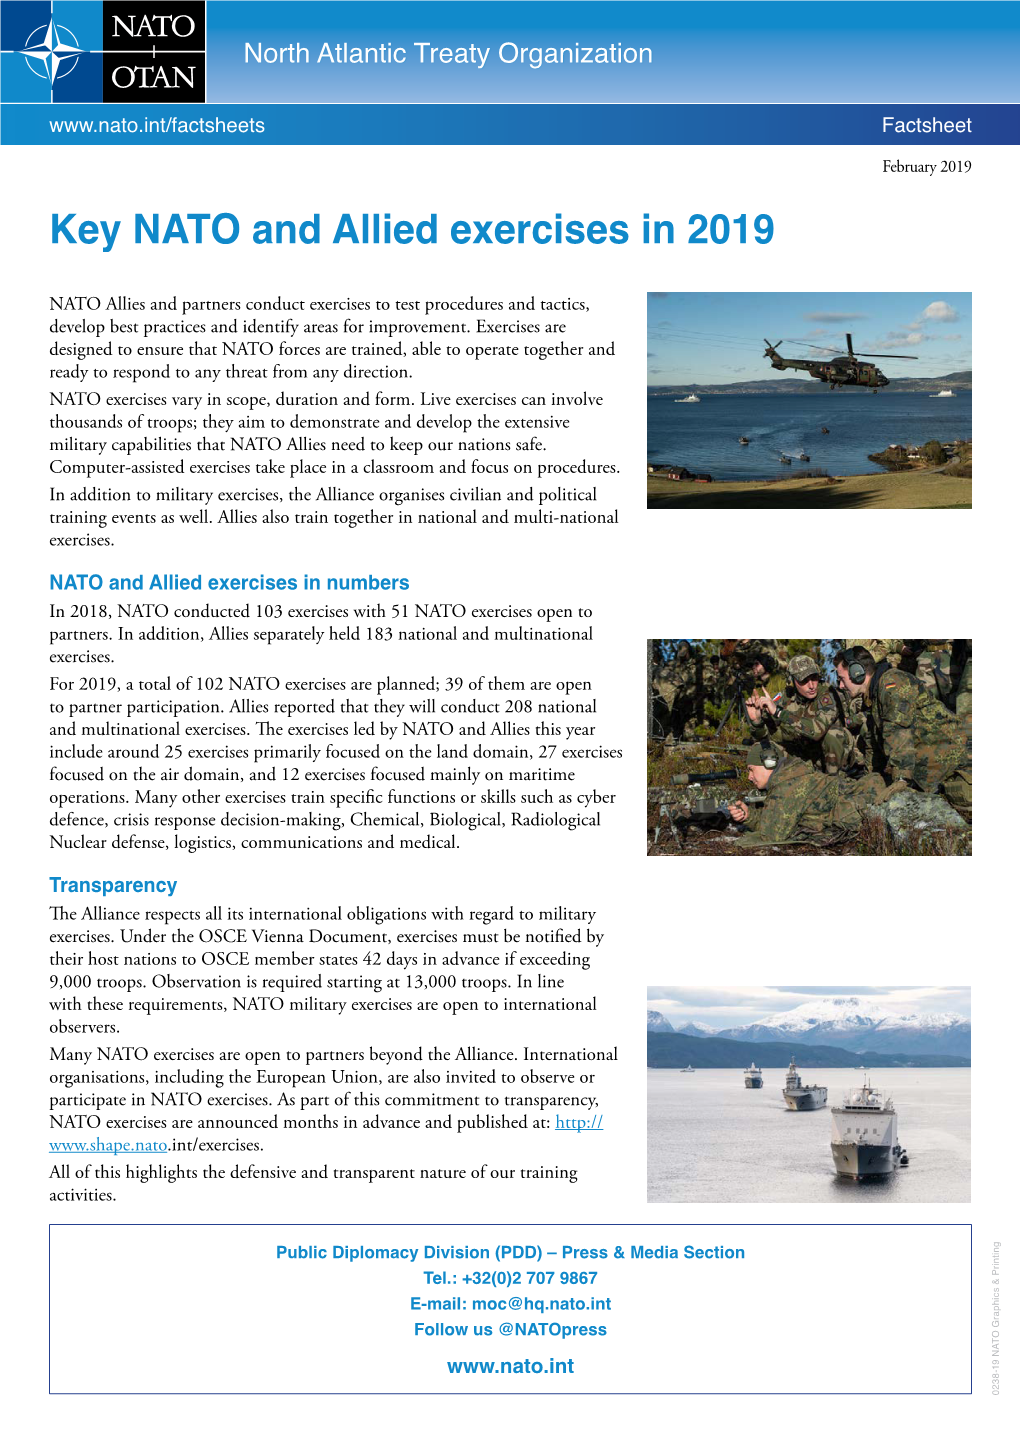 Key NATO and Allied Exercises in 2019